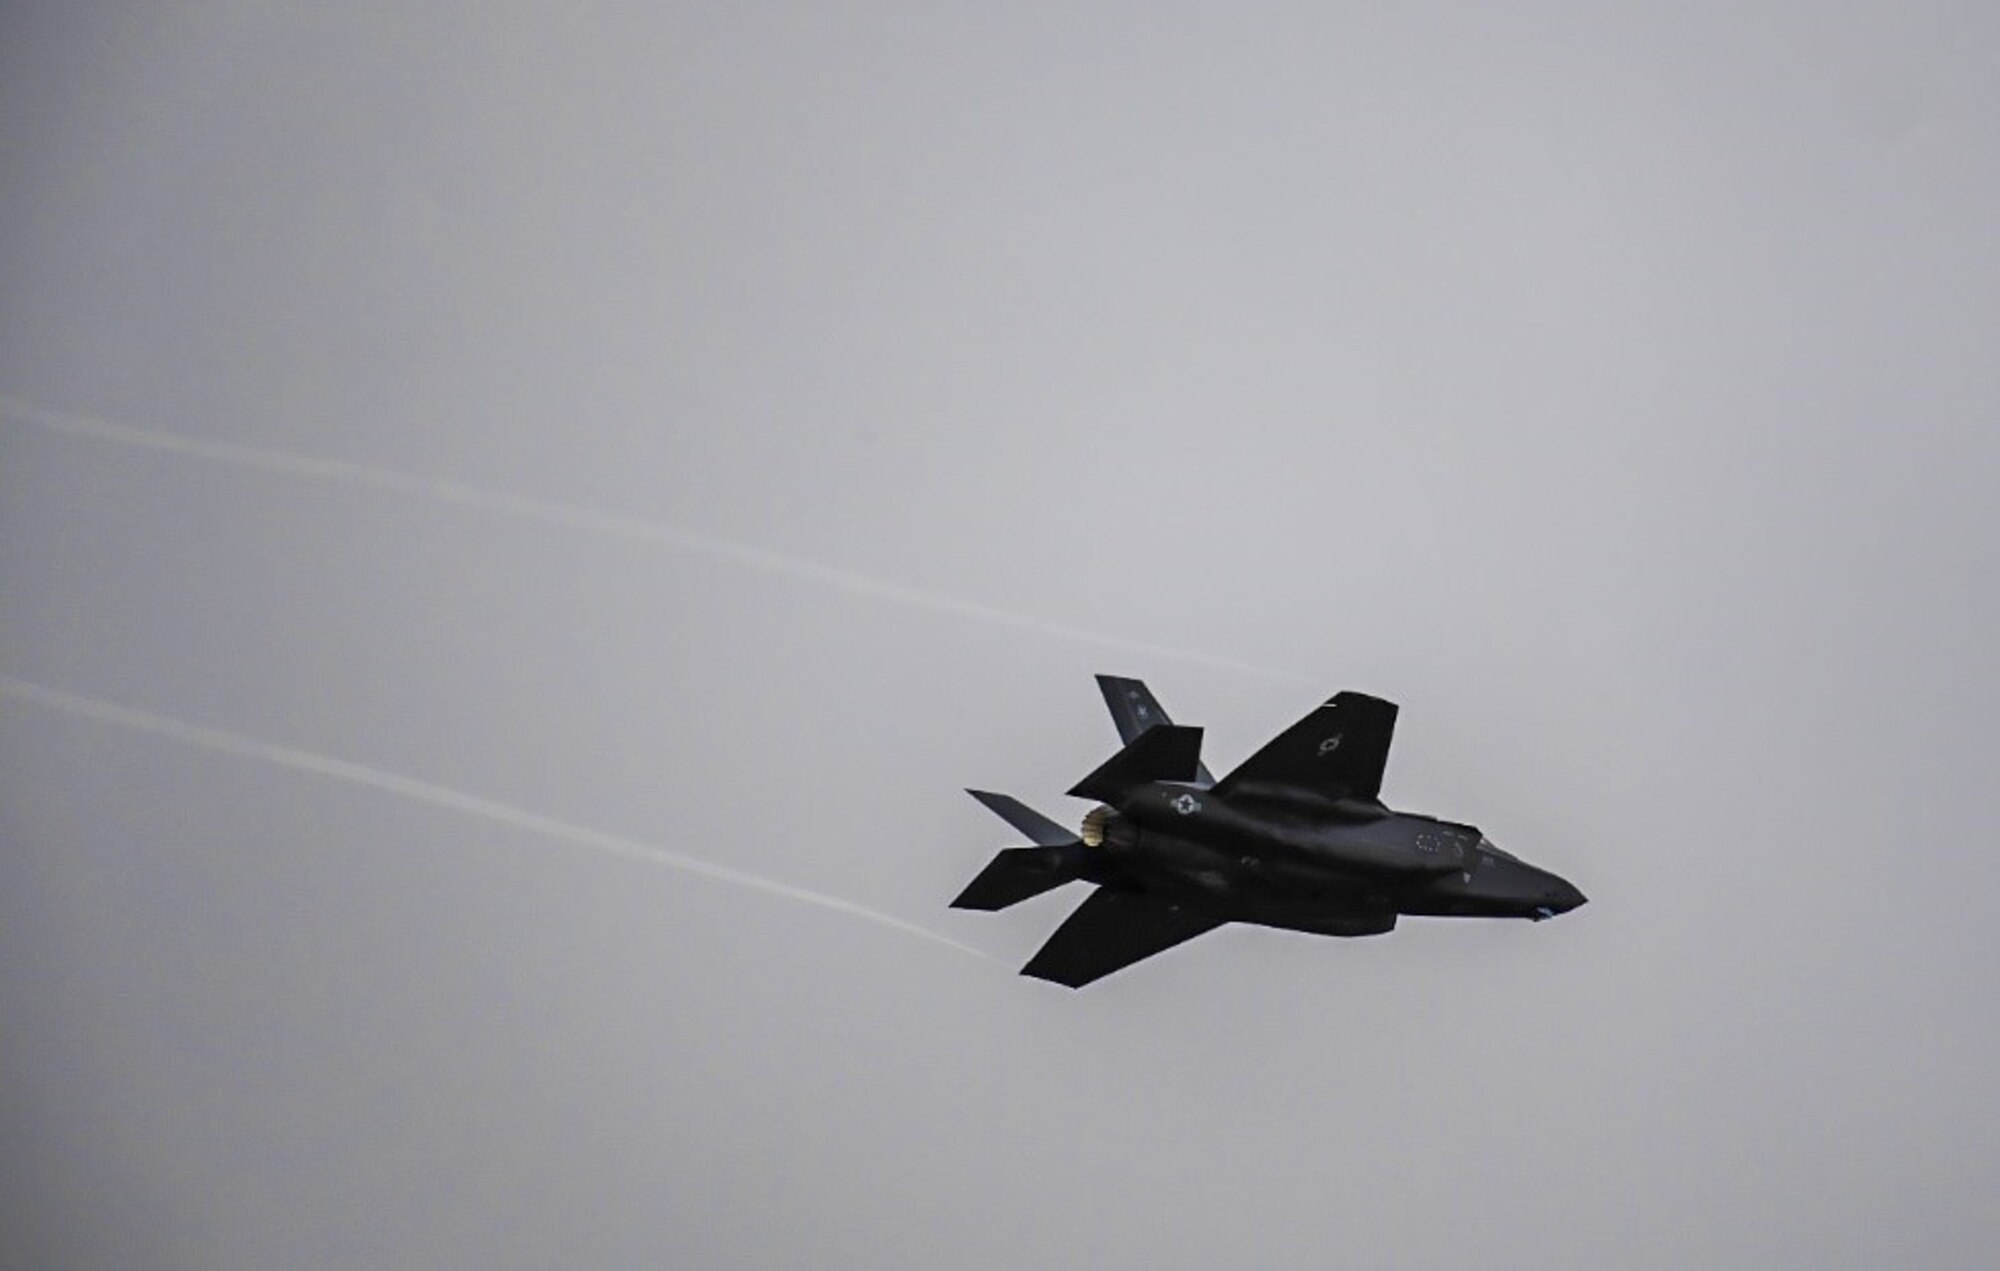 An F-35 Lightning II from Hill Air Force Base, Utah, flies over the flight line at Mountain Home AFB, Idaho, April 28, 2021. The F-35 participated in exercise Rainier War, testing its abilities to employ air combat capabilities during a time of potentially imminent foreign aggression.